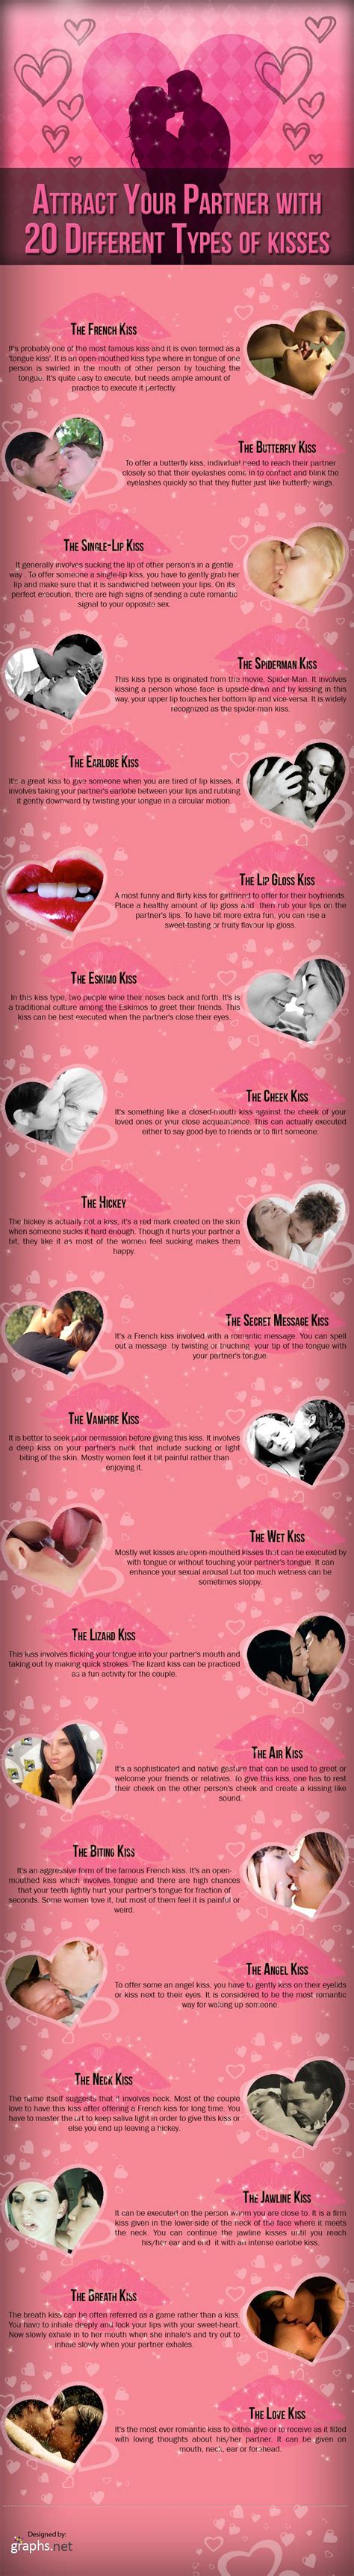 attract your partner with 20 different types of kisses infographic love quotes